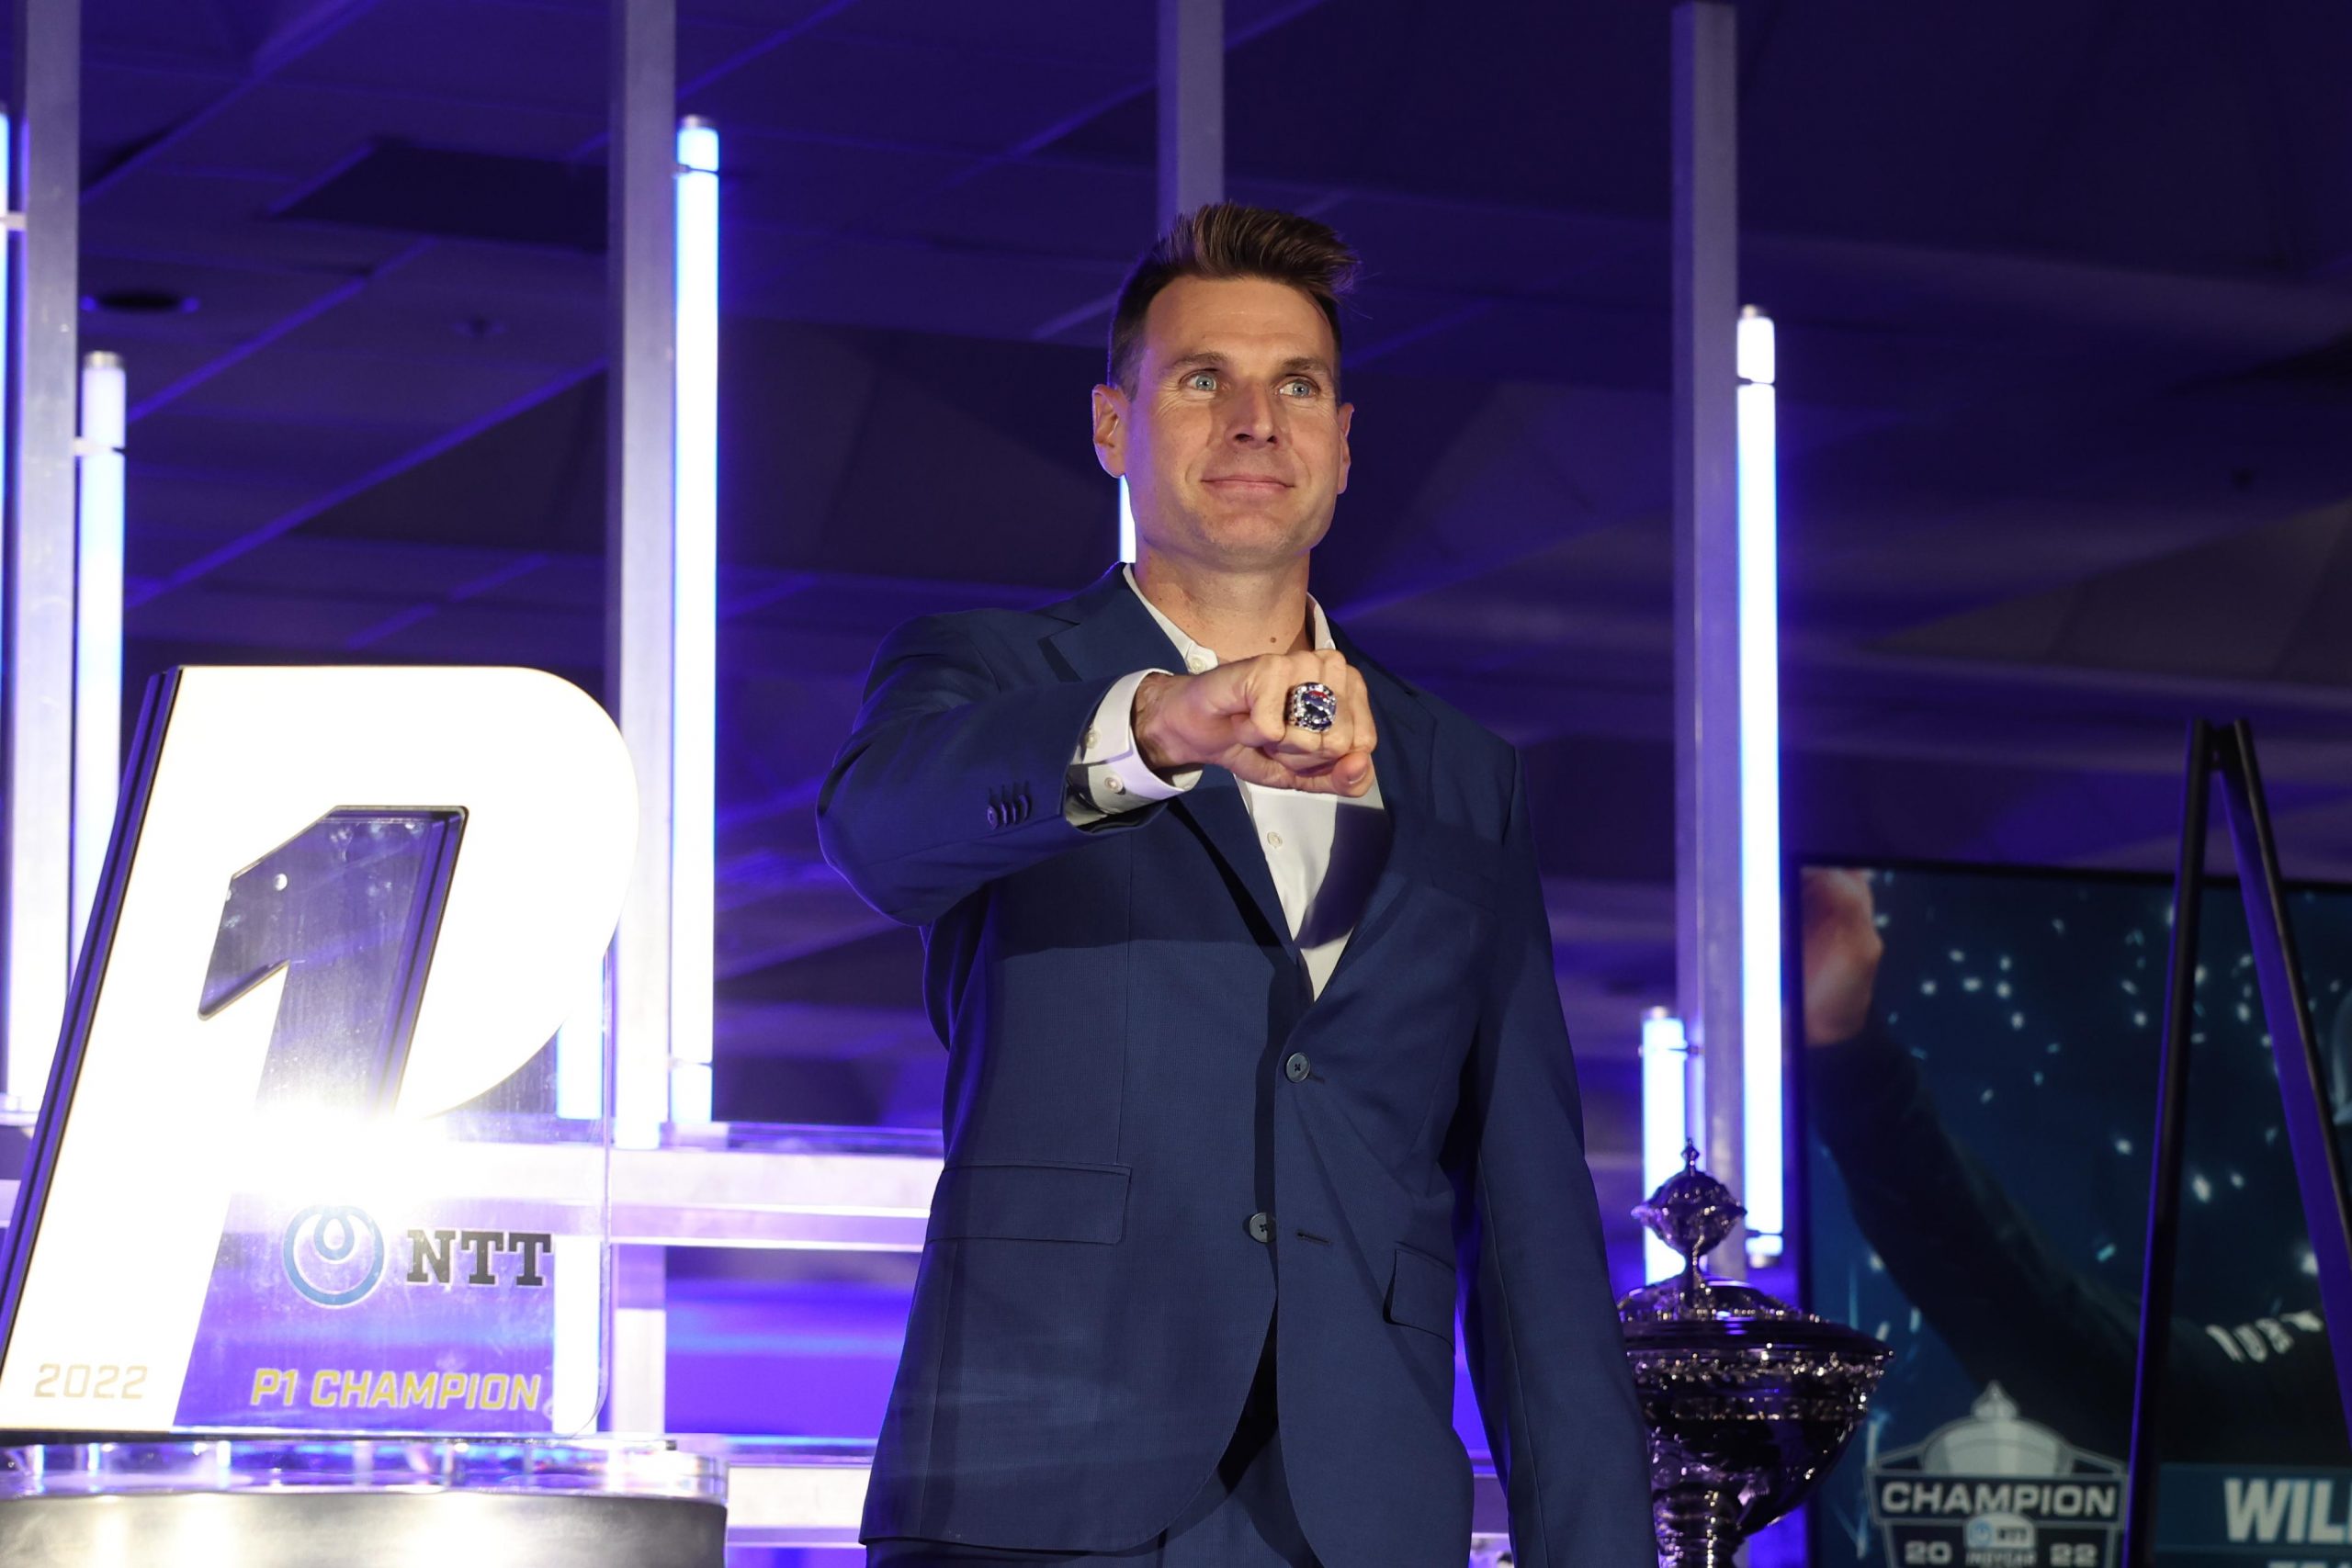 Team Penske's Will Power shows off his champonship ring at the 2022 IndyCar banquet